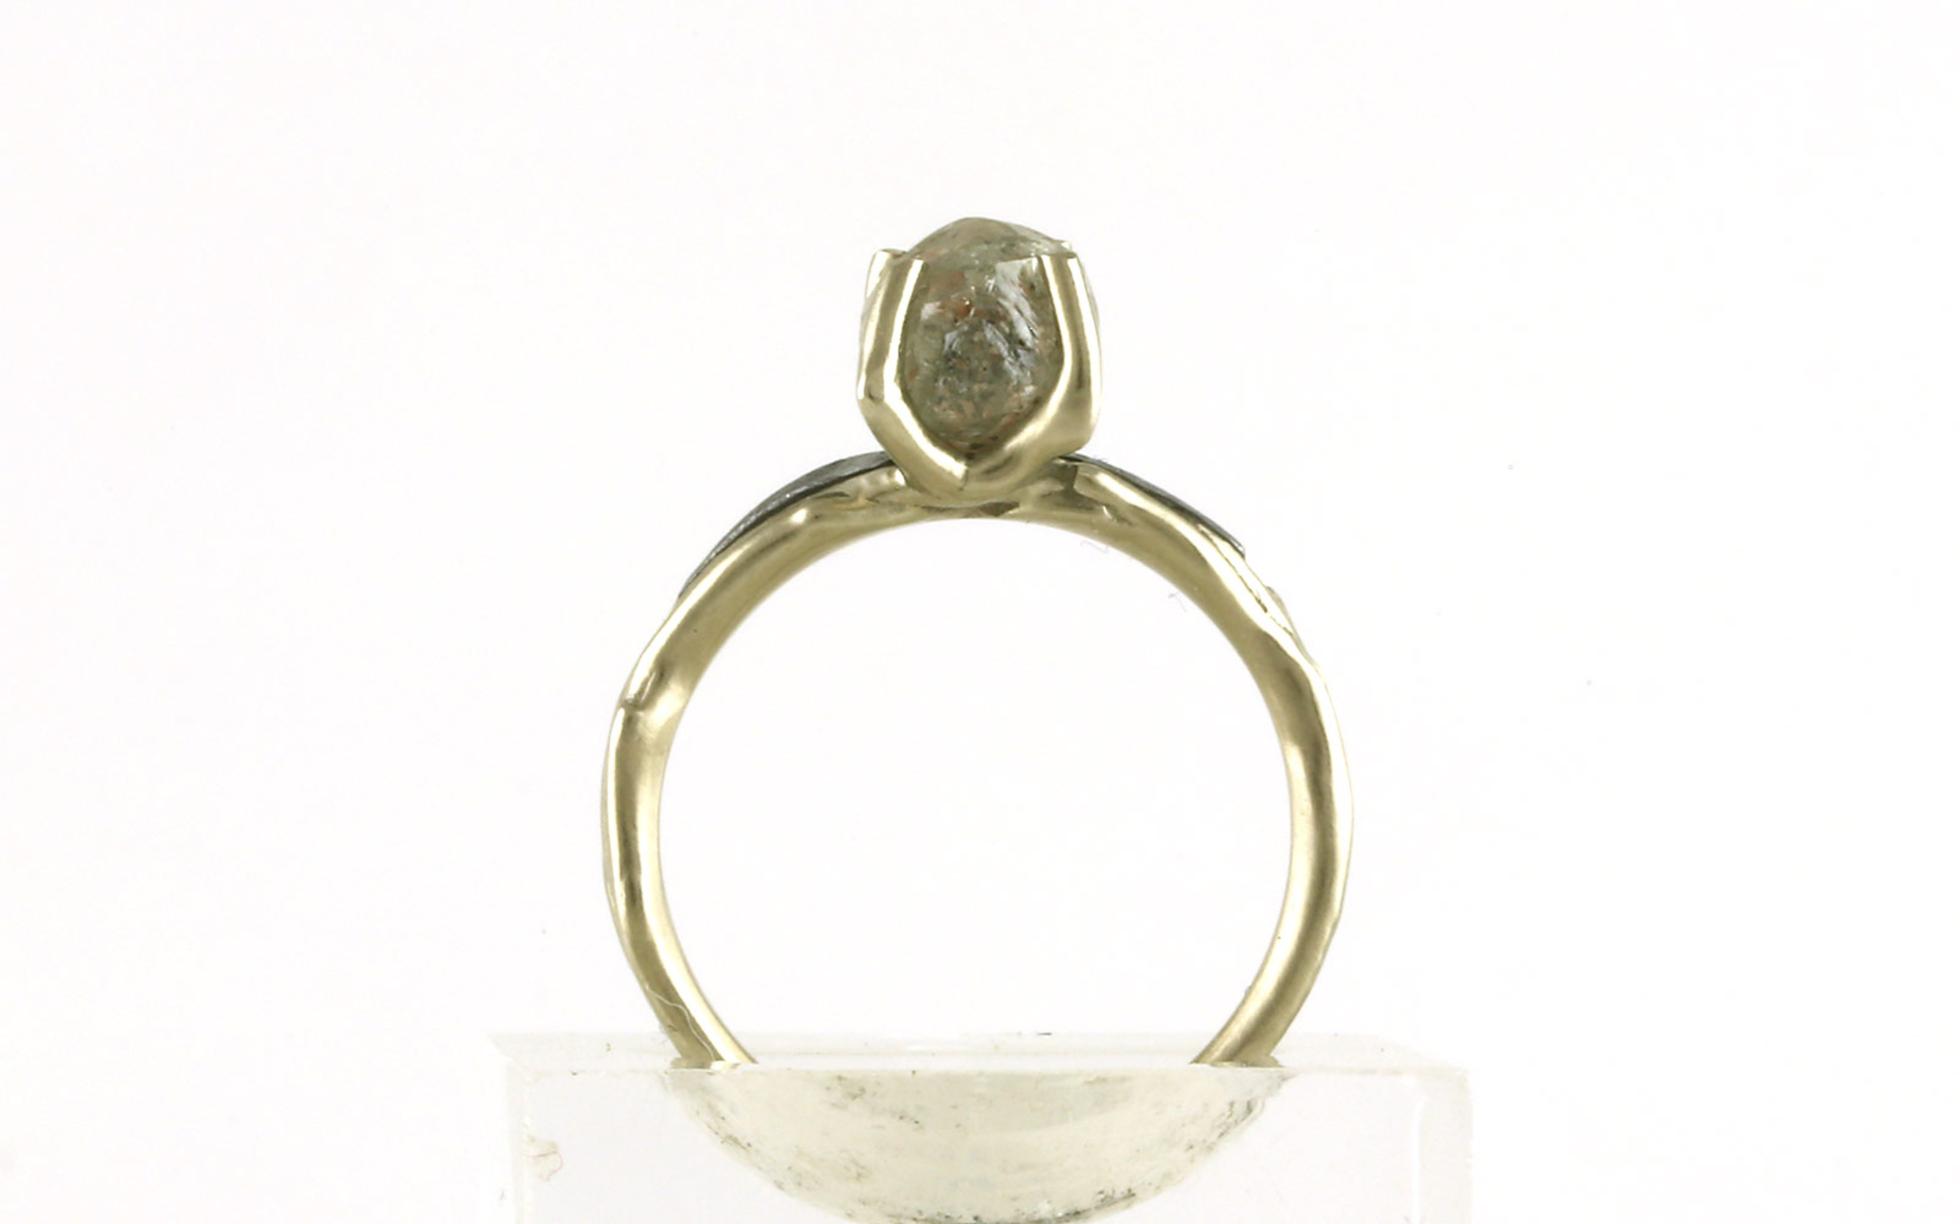 Raw Diamond Ring with Meteorite Inlay in Matte Finish White Gold